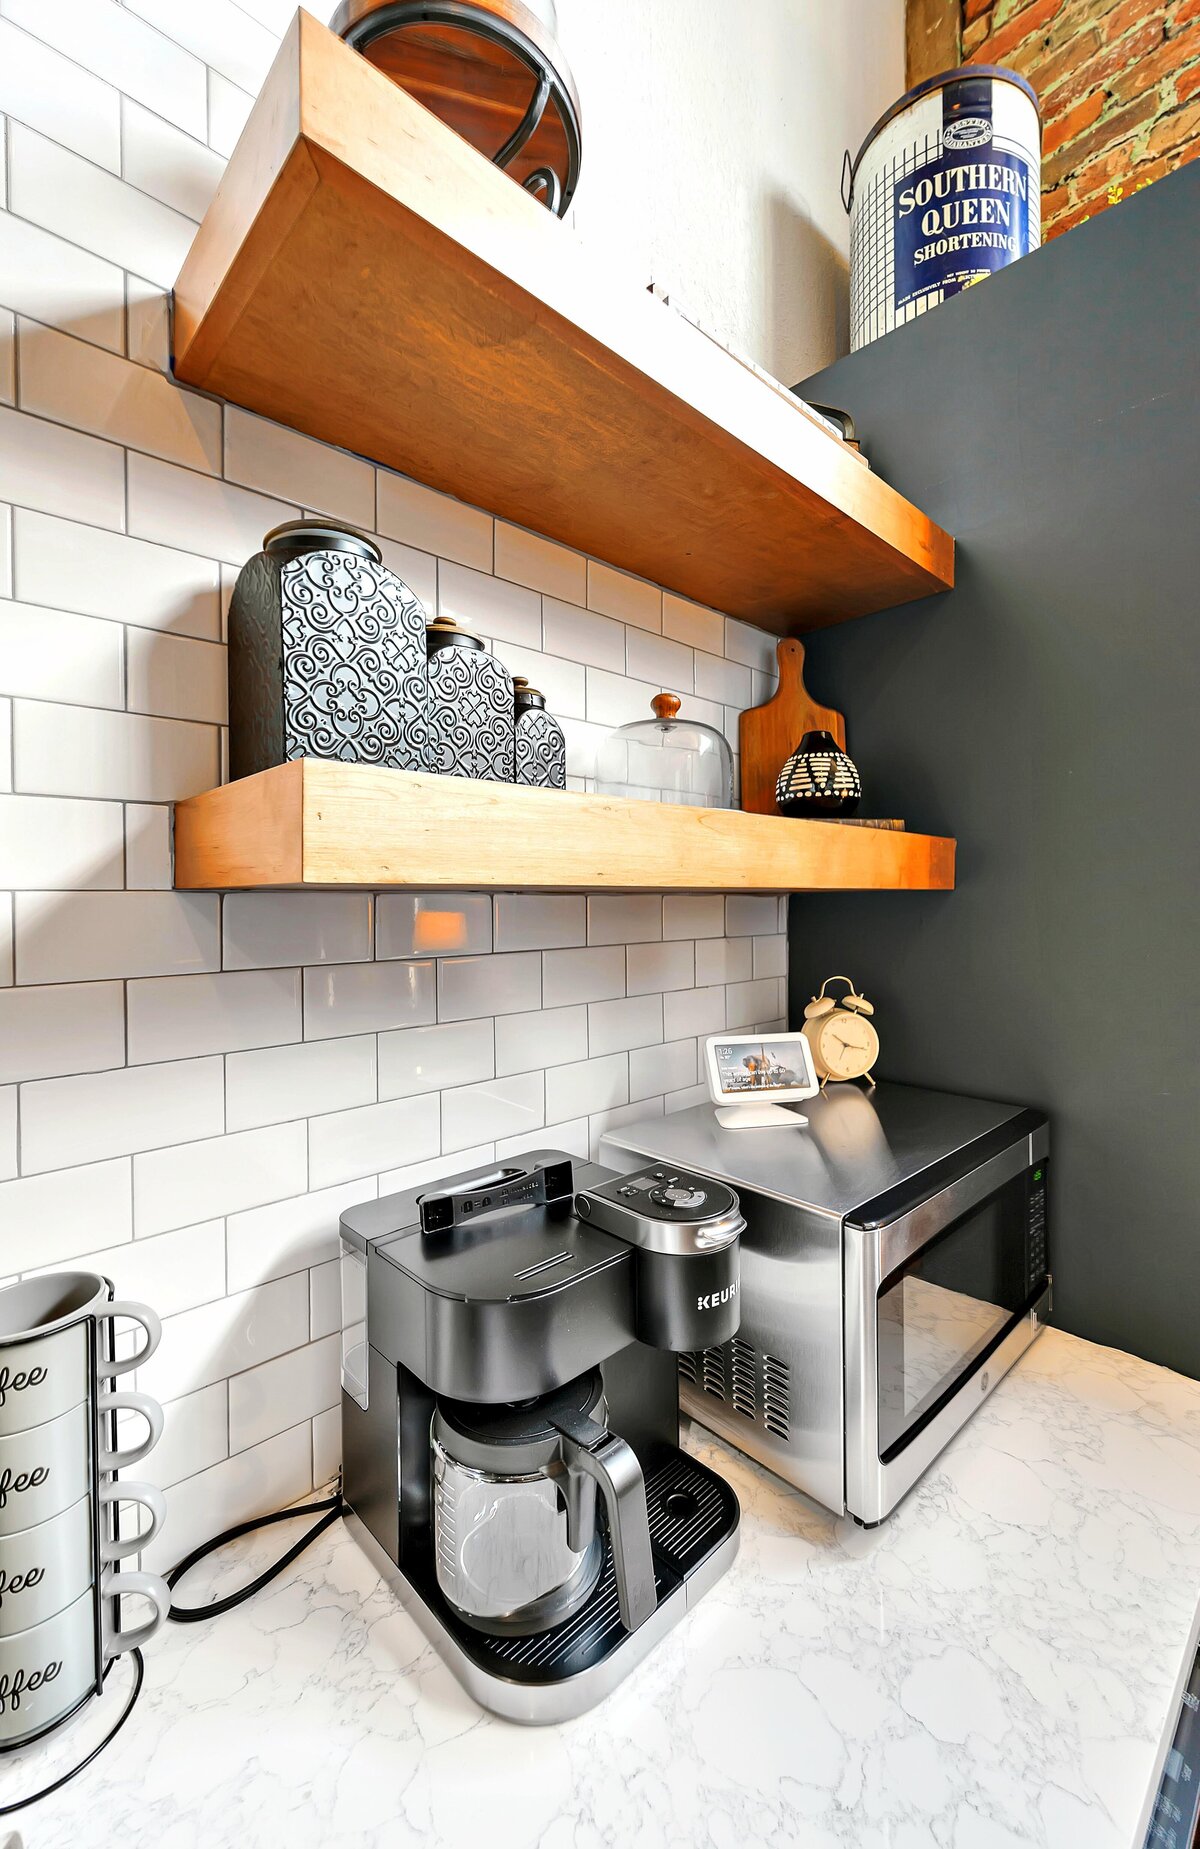 Coffee station includes coffee maker at Keurig with pods and creamer at this two-bedroom, two-bathroom vacation rental condo in the historic Behrens building in the heart of the Magnolia Silo District in downtown Waco, TX.